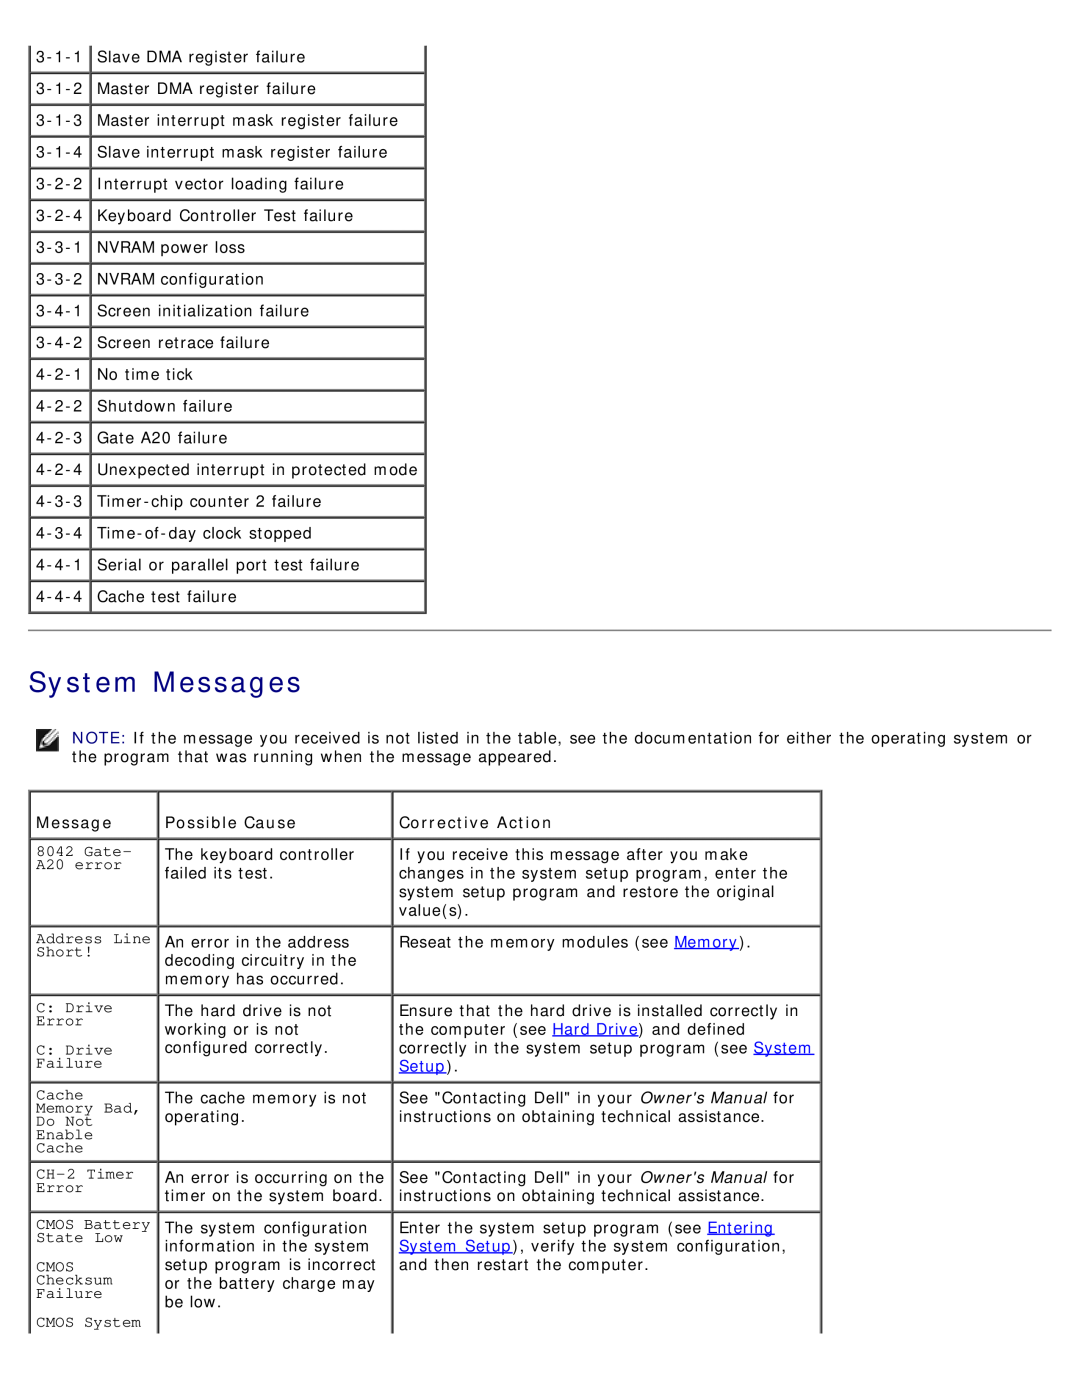 Dell DCDO, 710 H2C service manual System Messages, Possible Cause, Corrective Action 